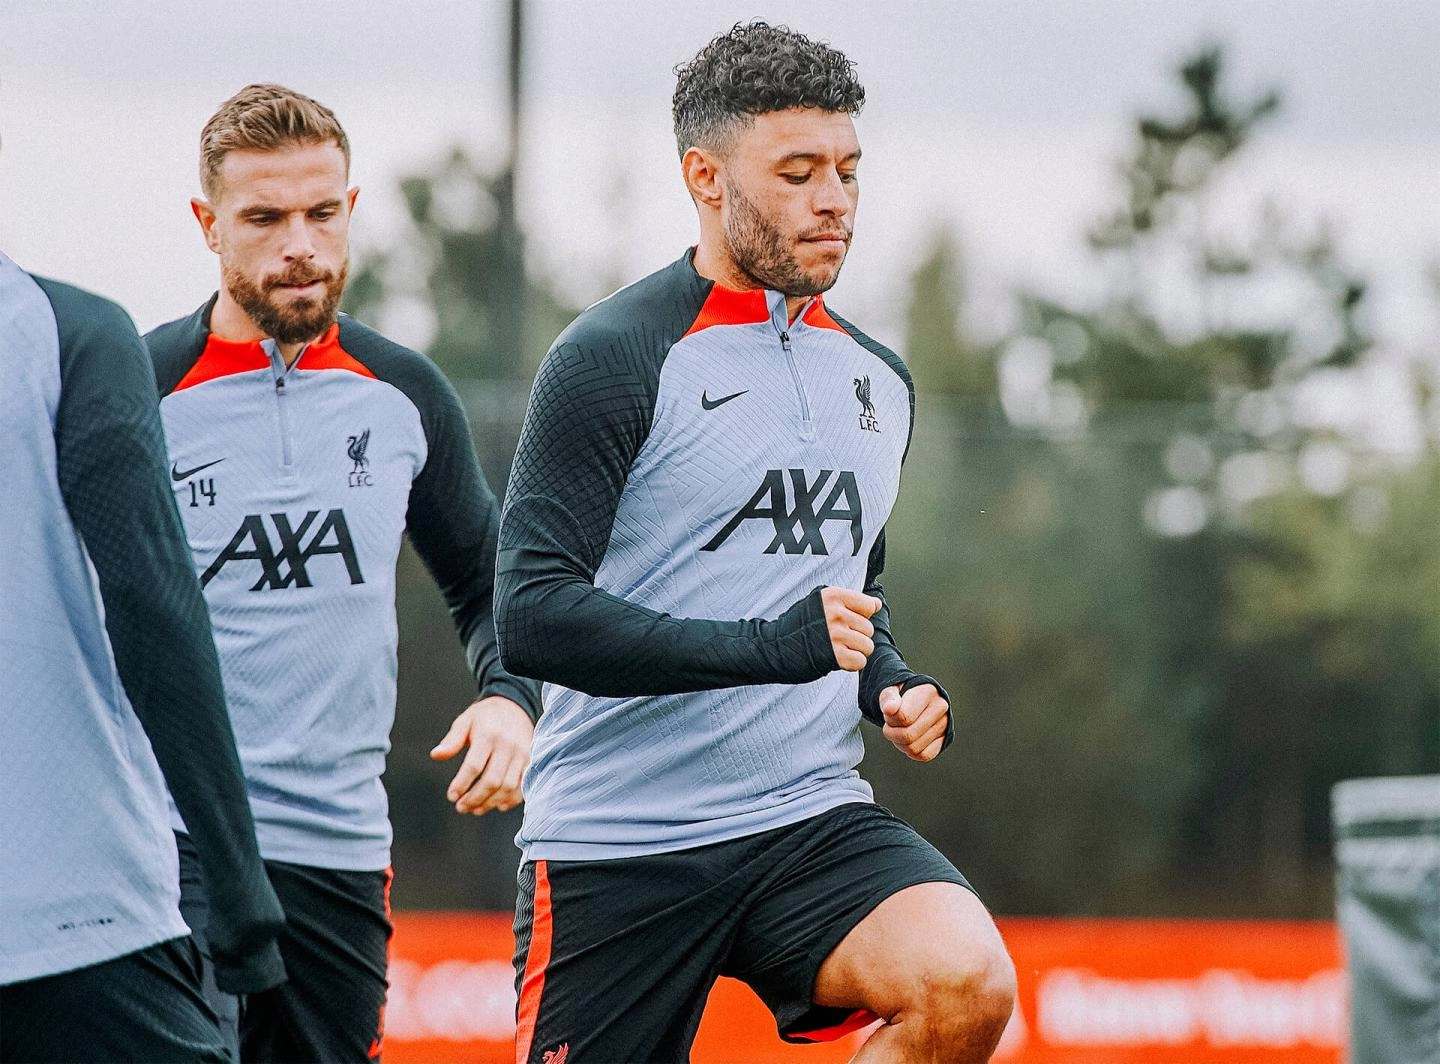 Alex Oxlade-Chamberlain pictured in training ahead of Liverpool's fixture vs Rangers.